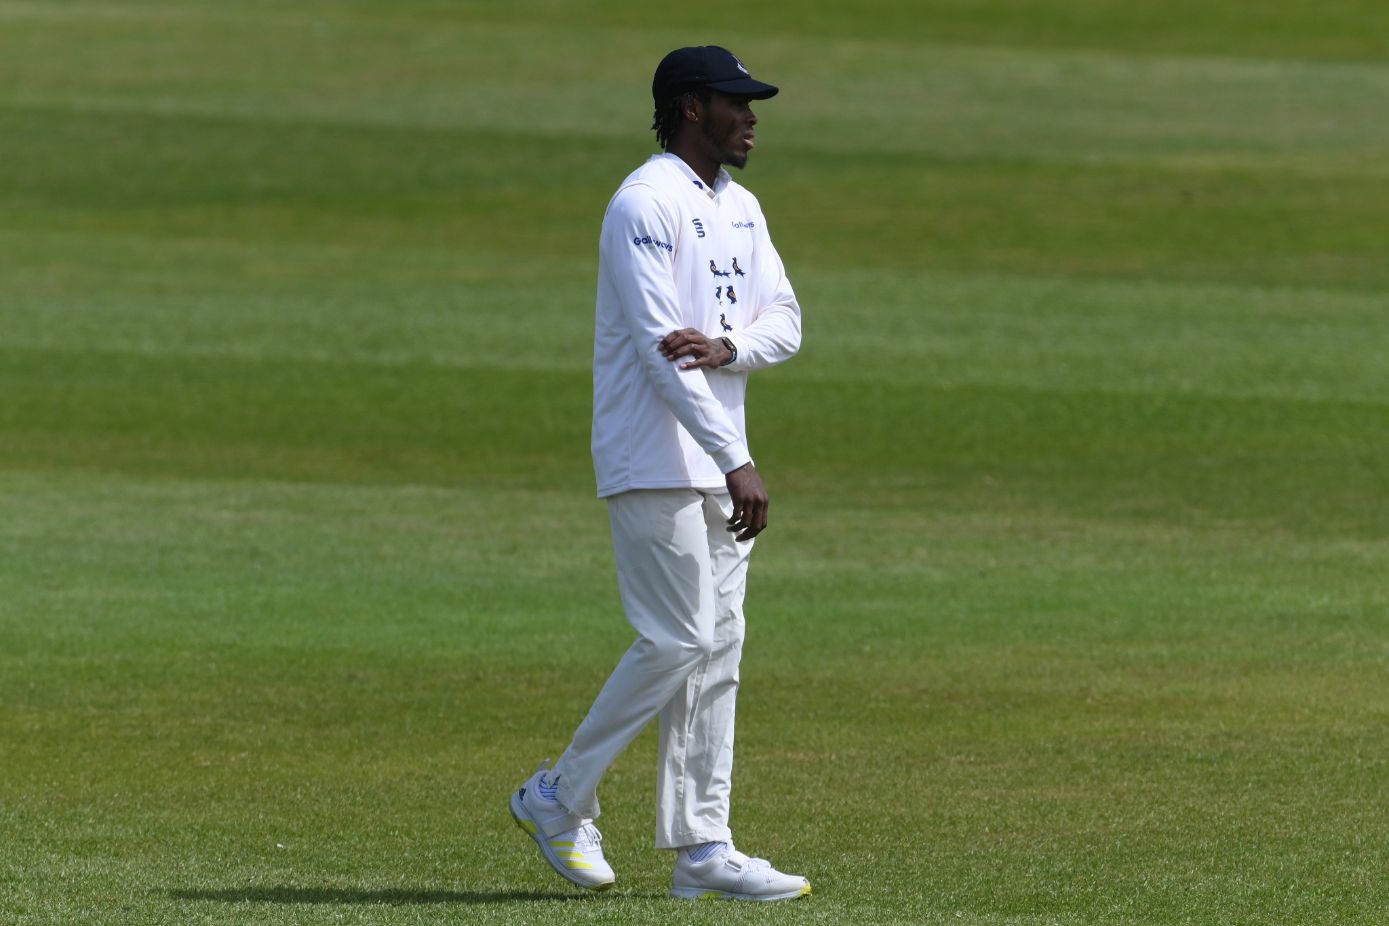 Jofra Archer undergoes elbow surgery, England fret over availability in Tests